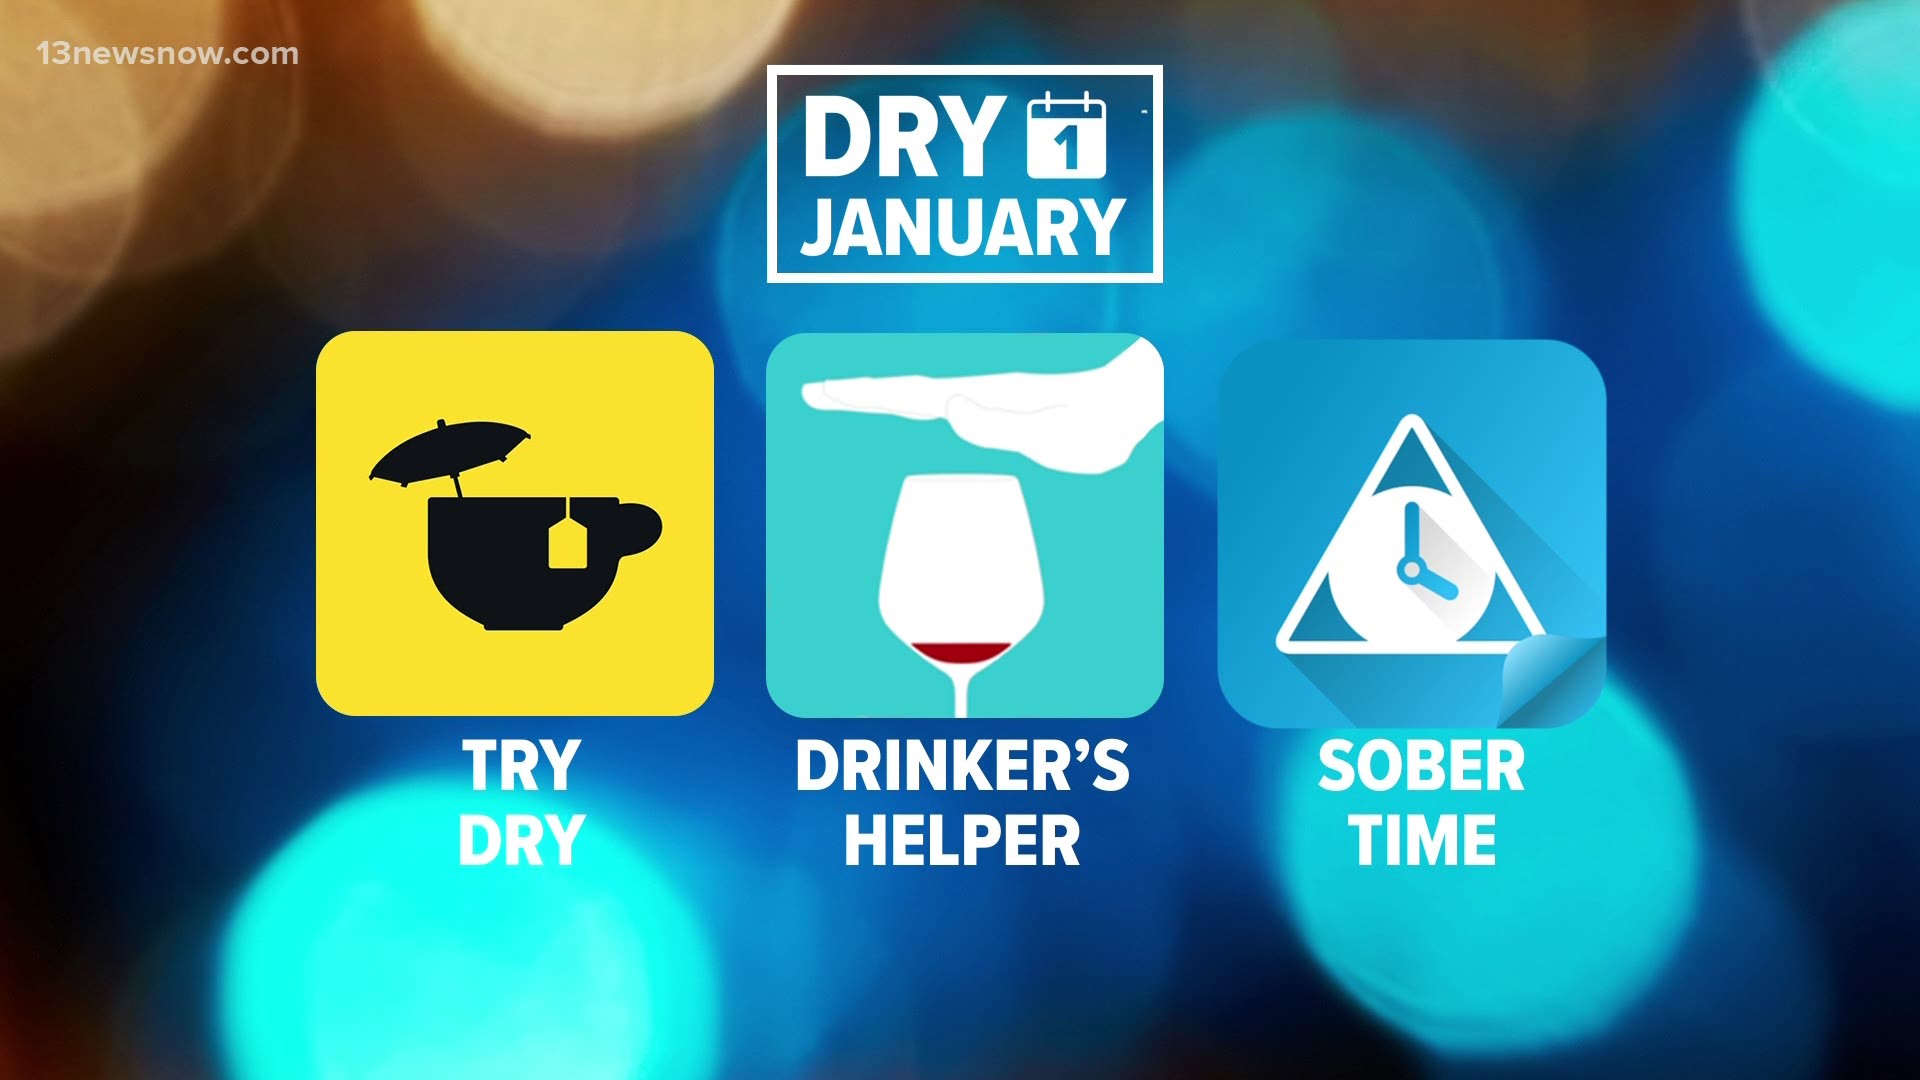 If you want to challenge yourself to drink less in 2021, there are some free apps that help people track their drinking. Alcoholics still need professional help.